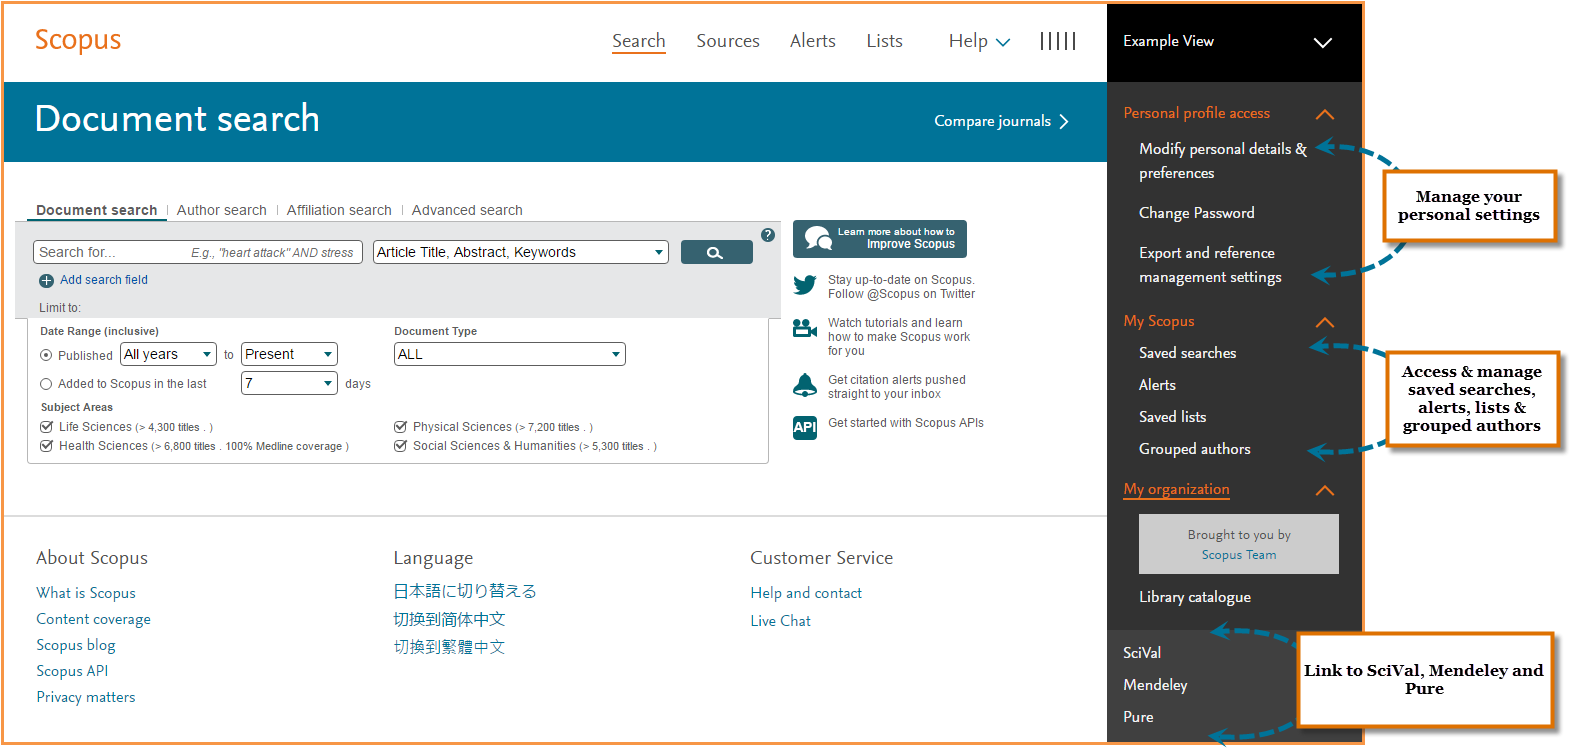 Scopus. Saved searches